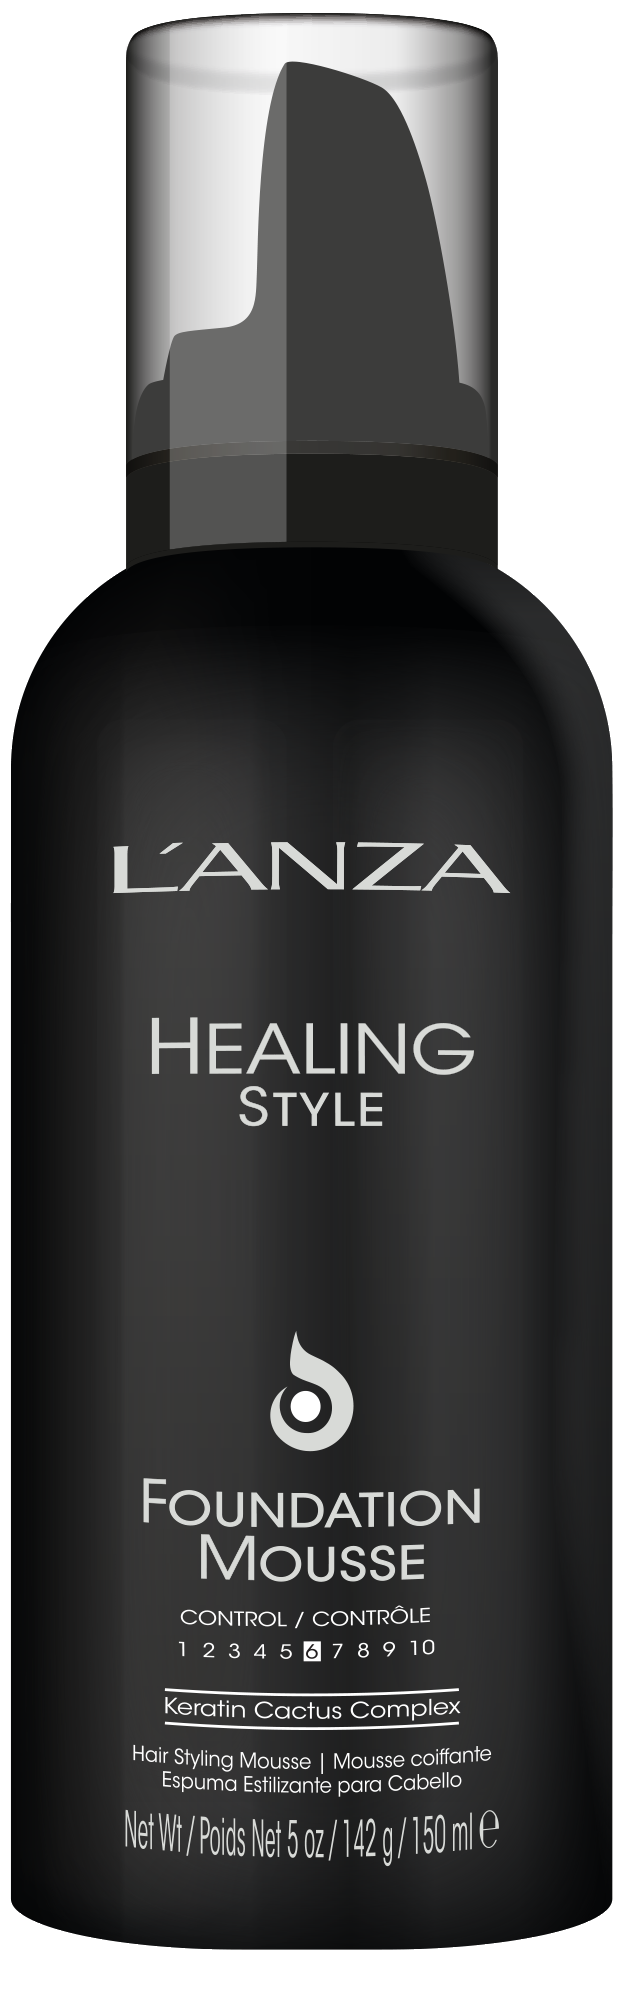 L'ANZA Healing Style Foundation Mousse